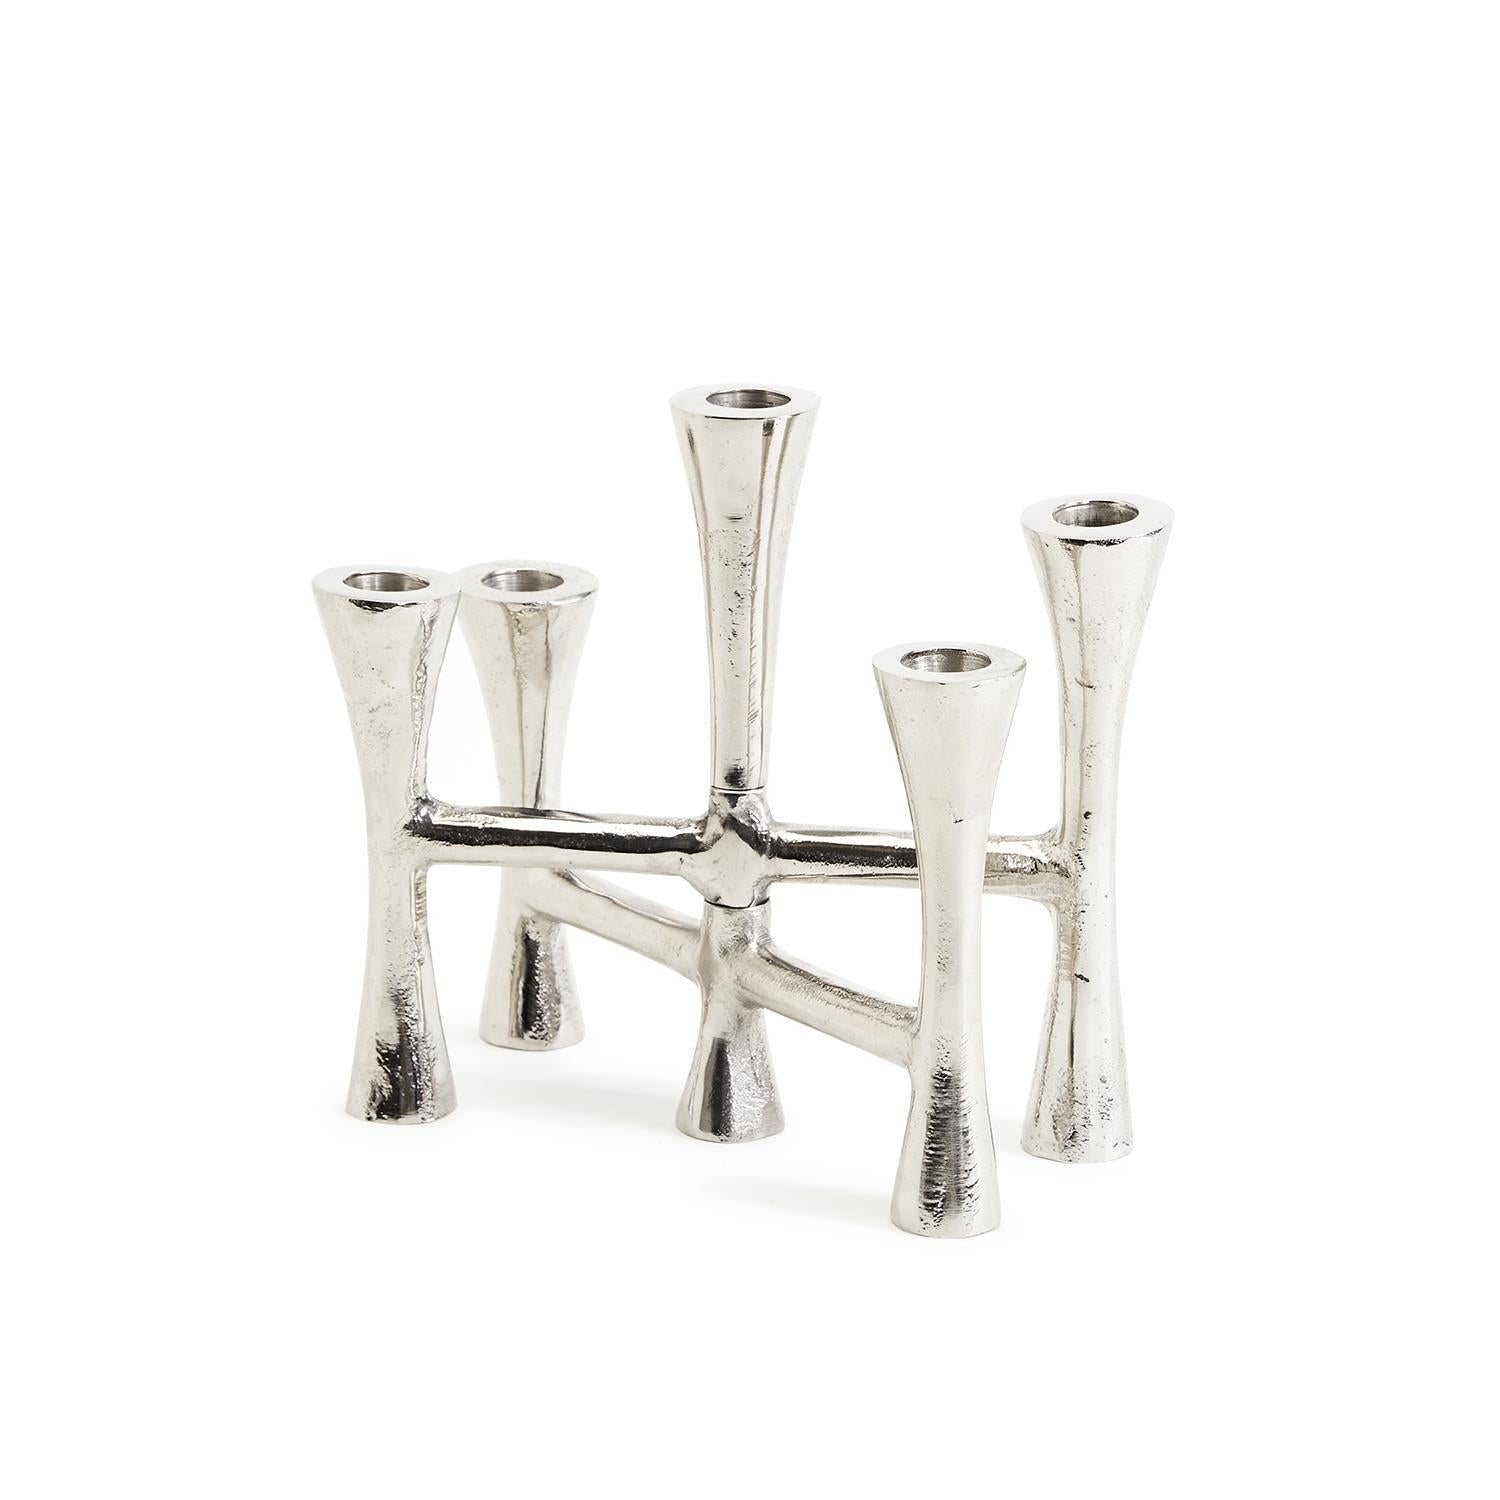 Two's Company Silver Taper Candle Holder Holds 5 Candles